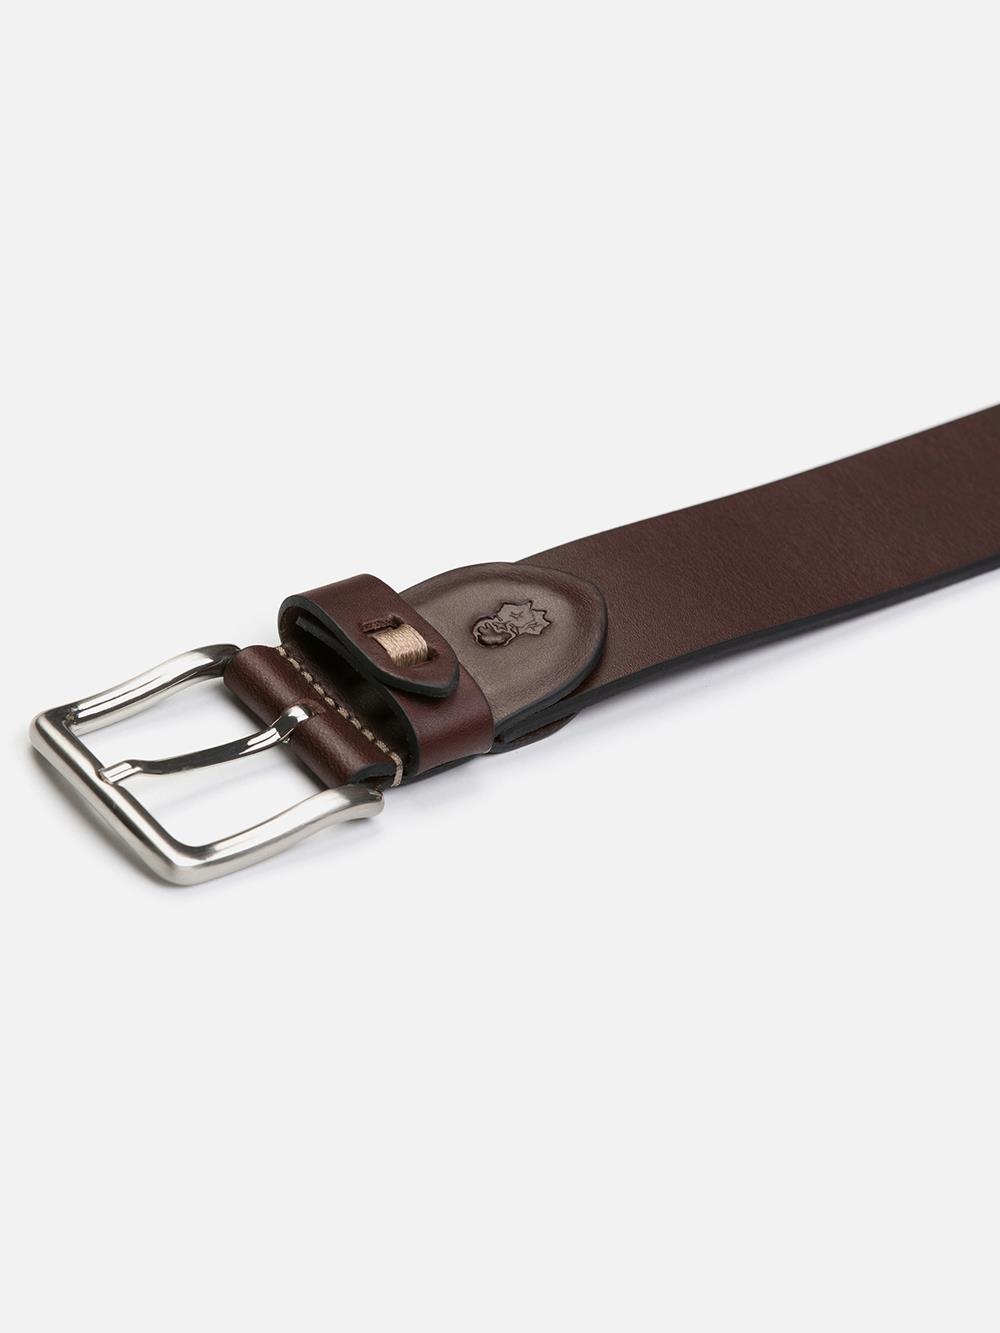 Brown patinated leather belt